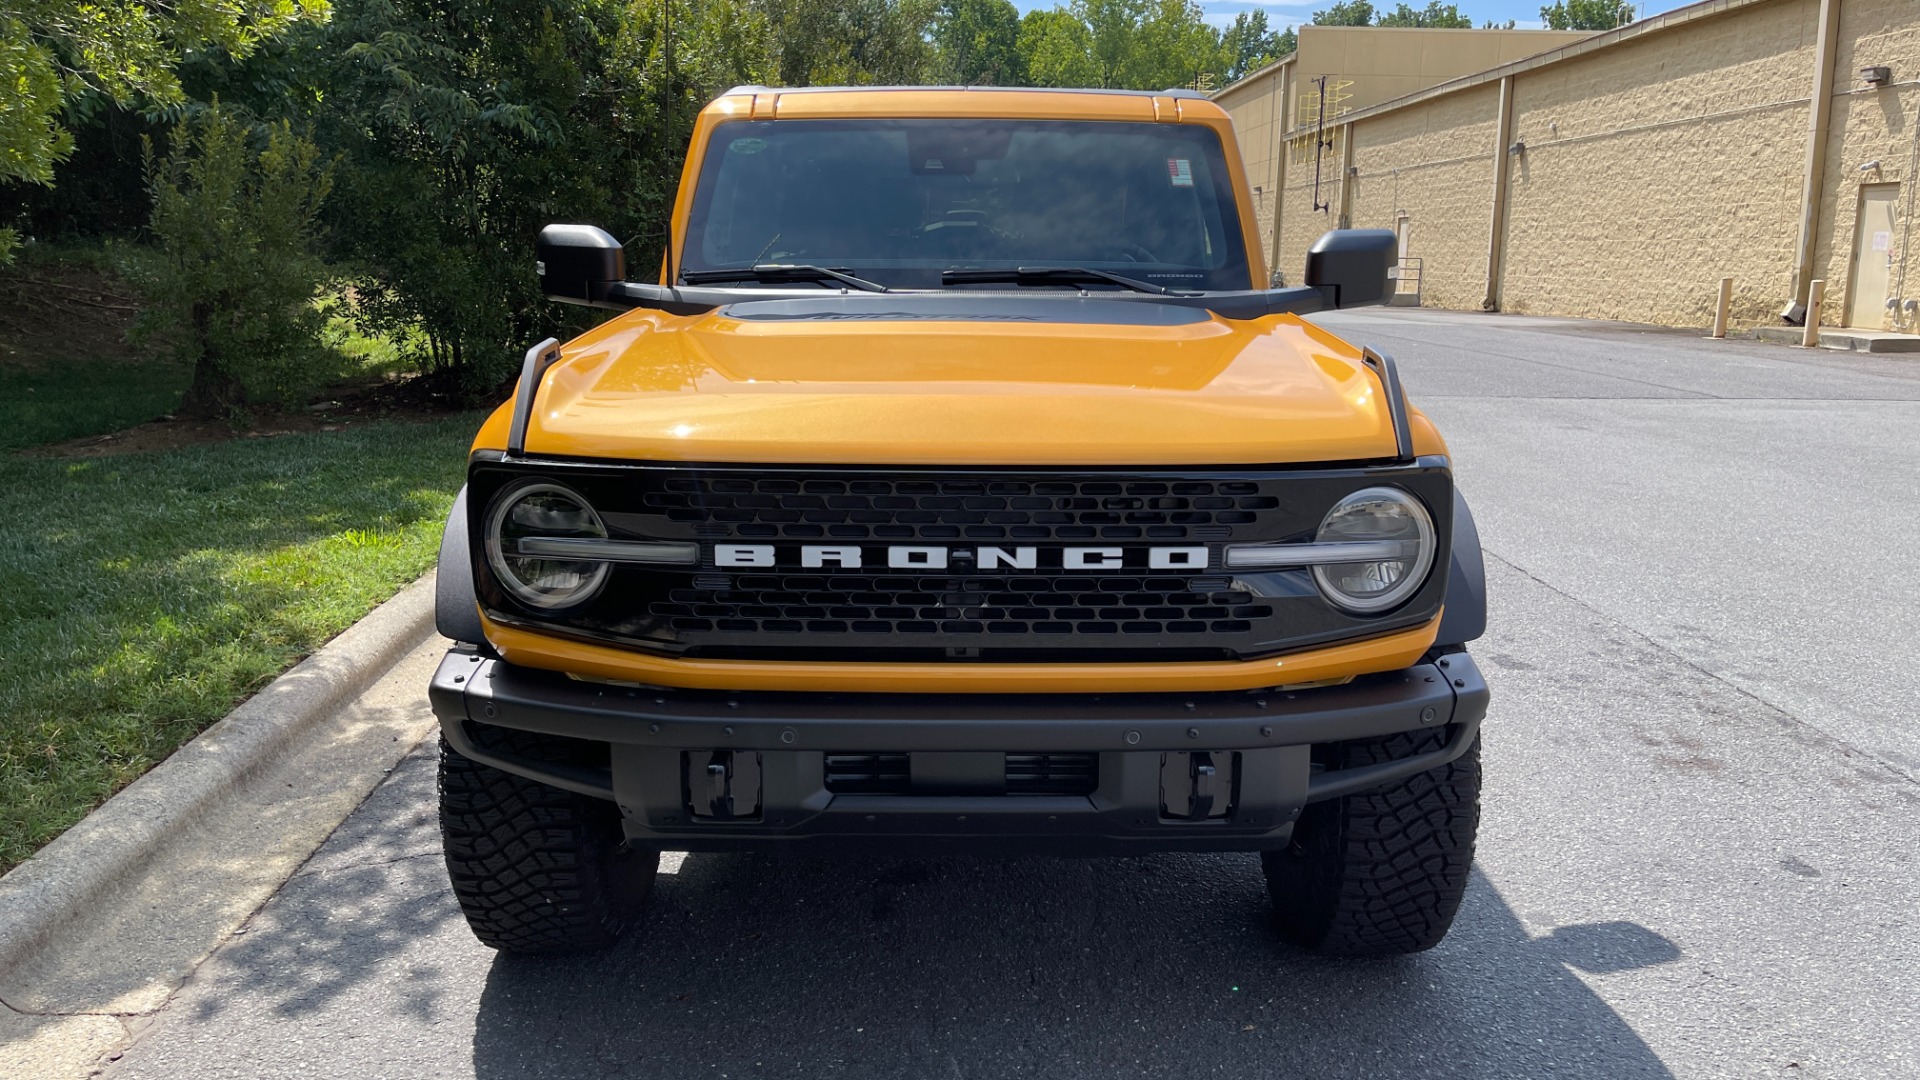 Used 2022 Ford Bronco ADVANCED WILDTRAK / CYBER ORANGE PAINT / HARD TOP / ADAPTIVE CRUISE for sale $71,999 at Formula Imports in Charlotte NC 28227 4